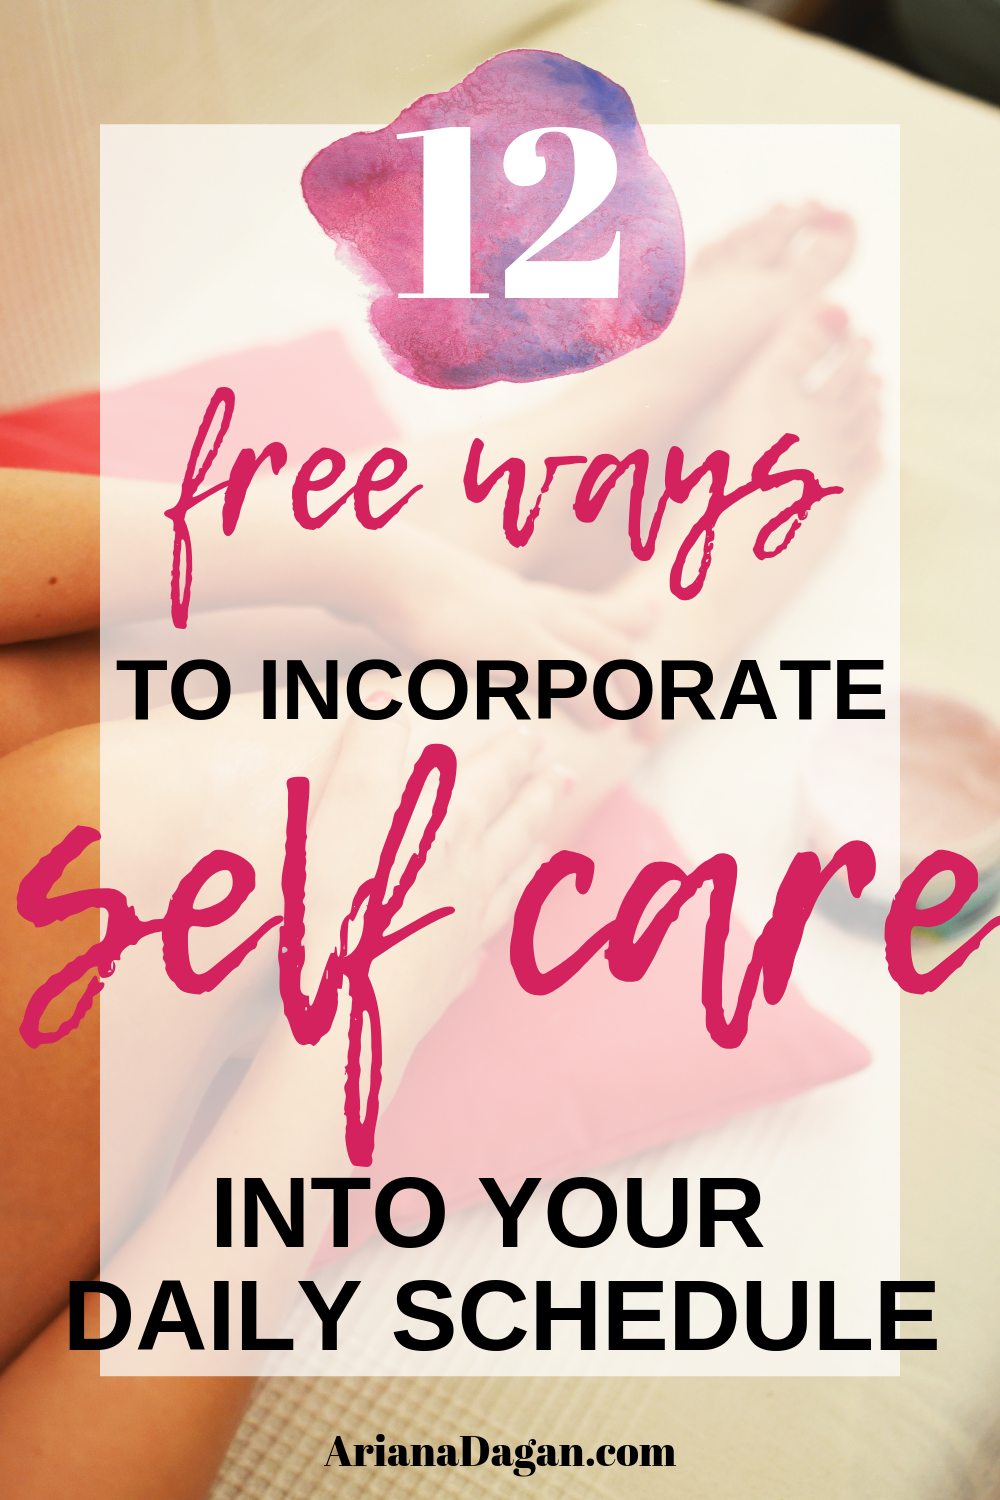 12 No Spend Self Care Ideas in 5 Minutes a Day by Ariana Dagan fb:app_id